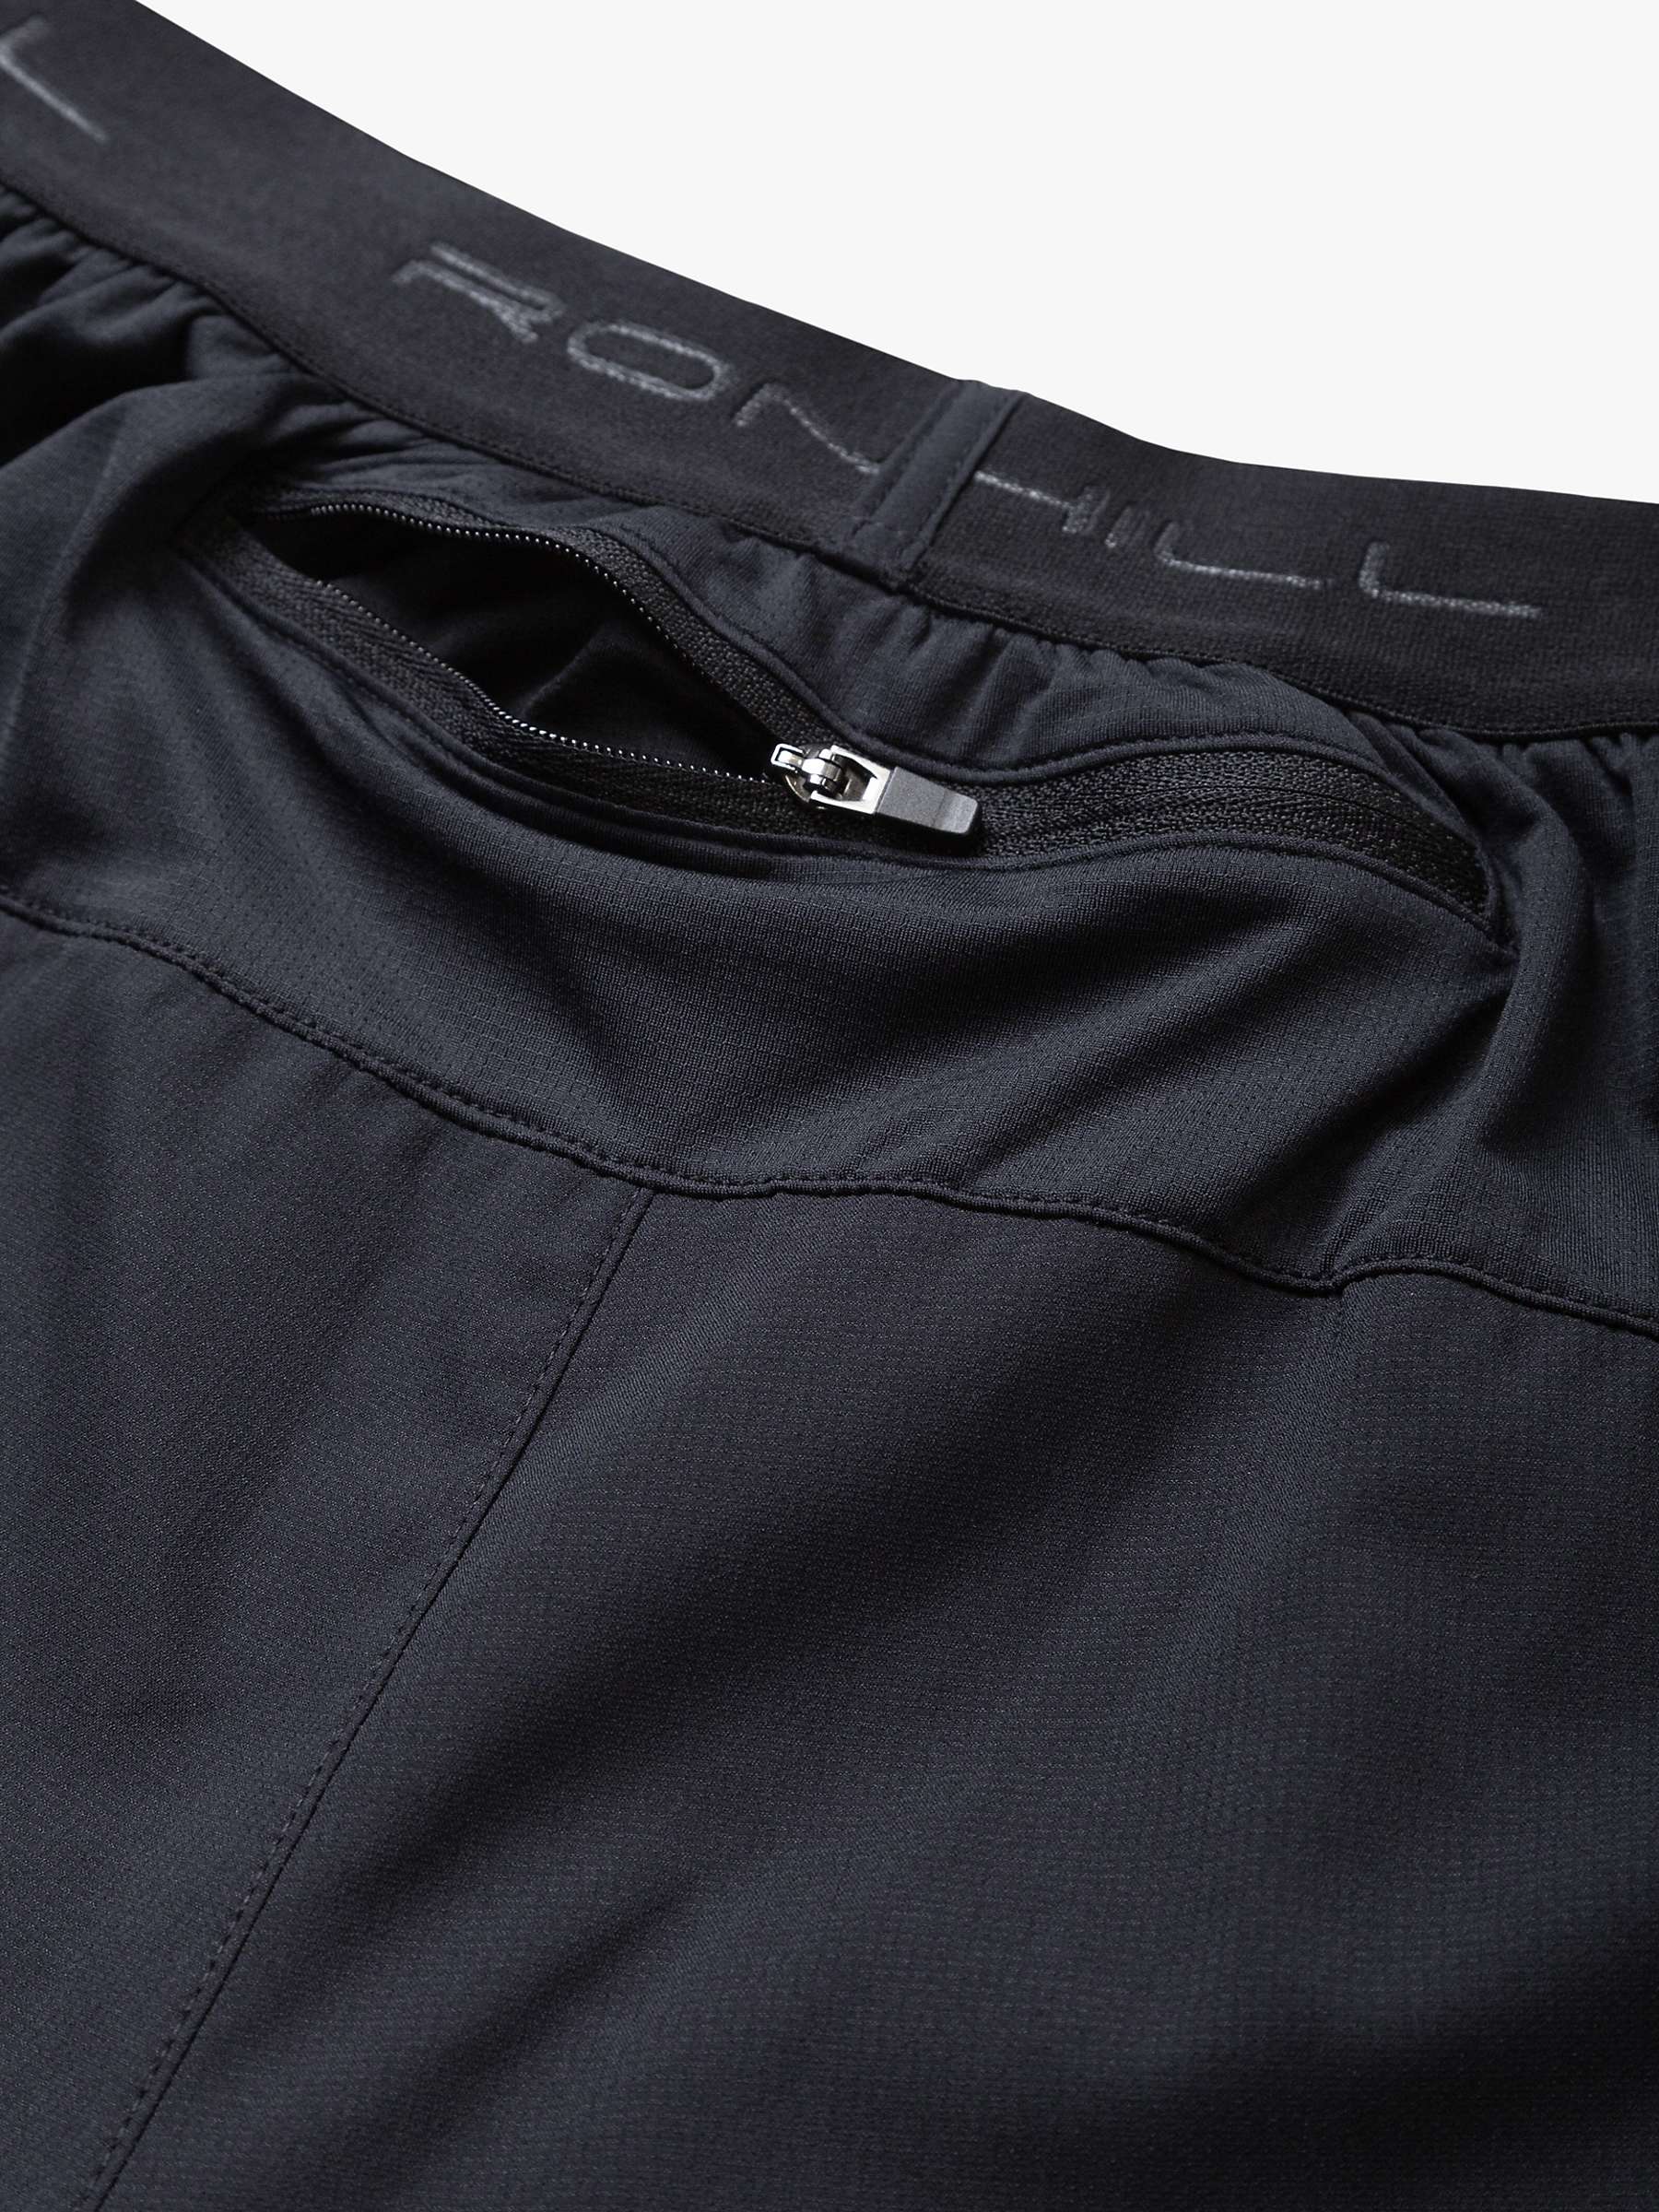 Buy Ronhill Twin Shorts, Black Online at johnlewis.com